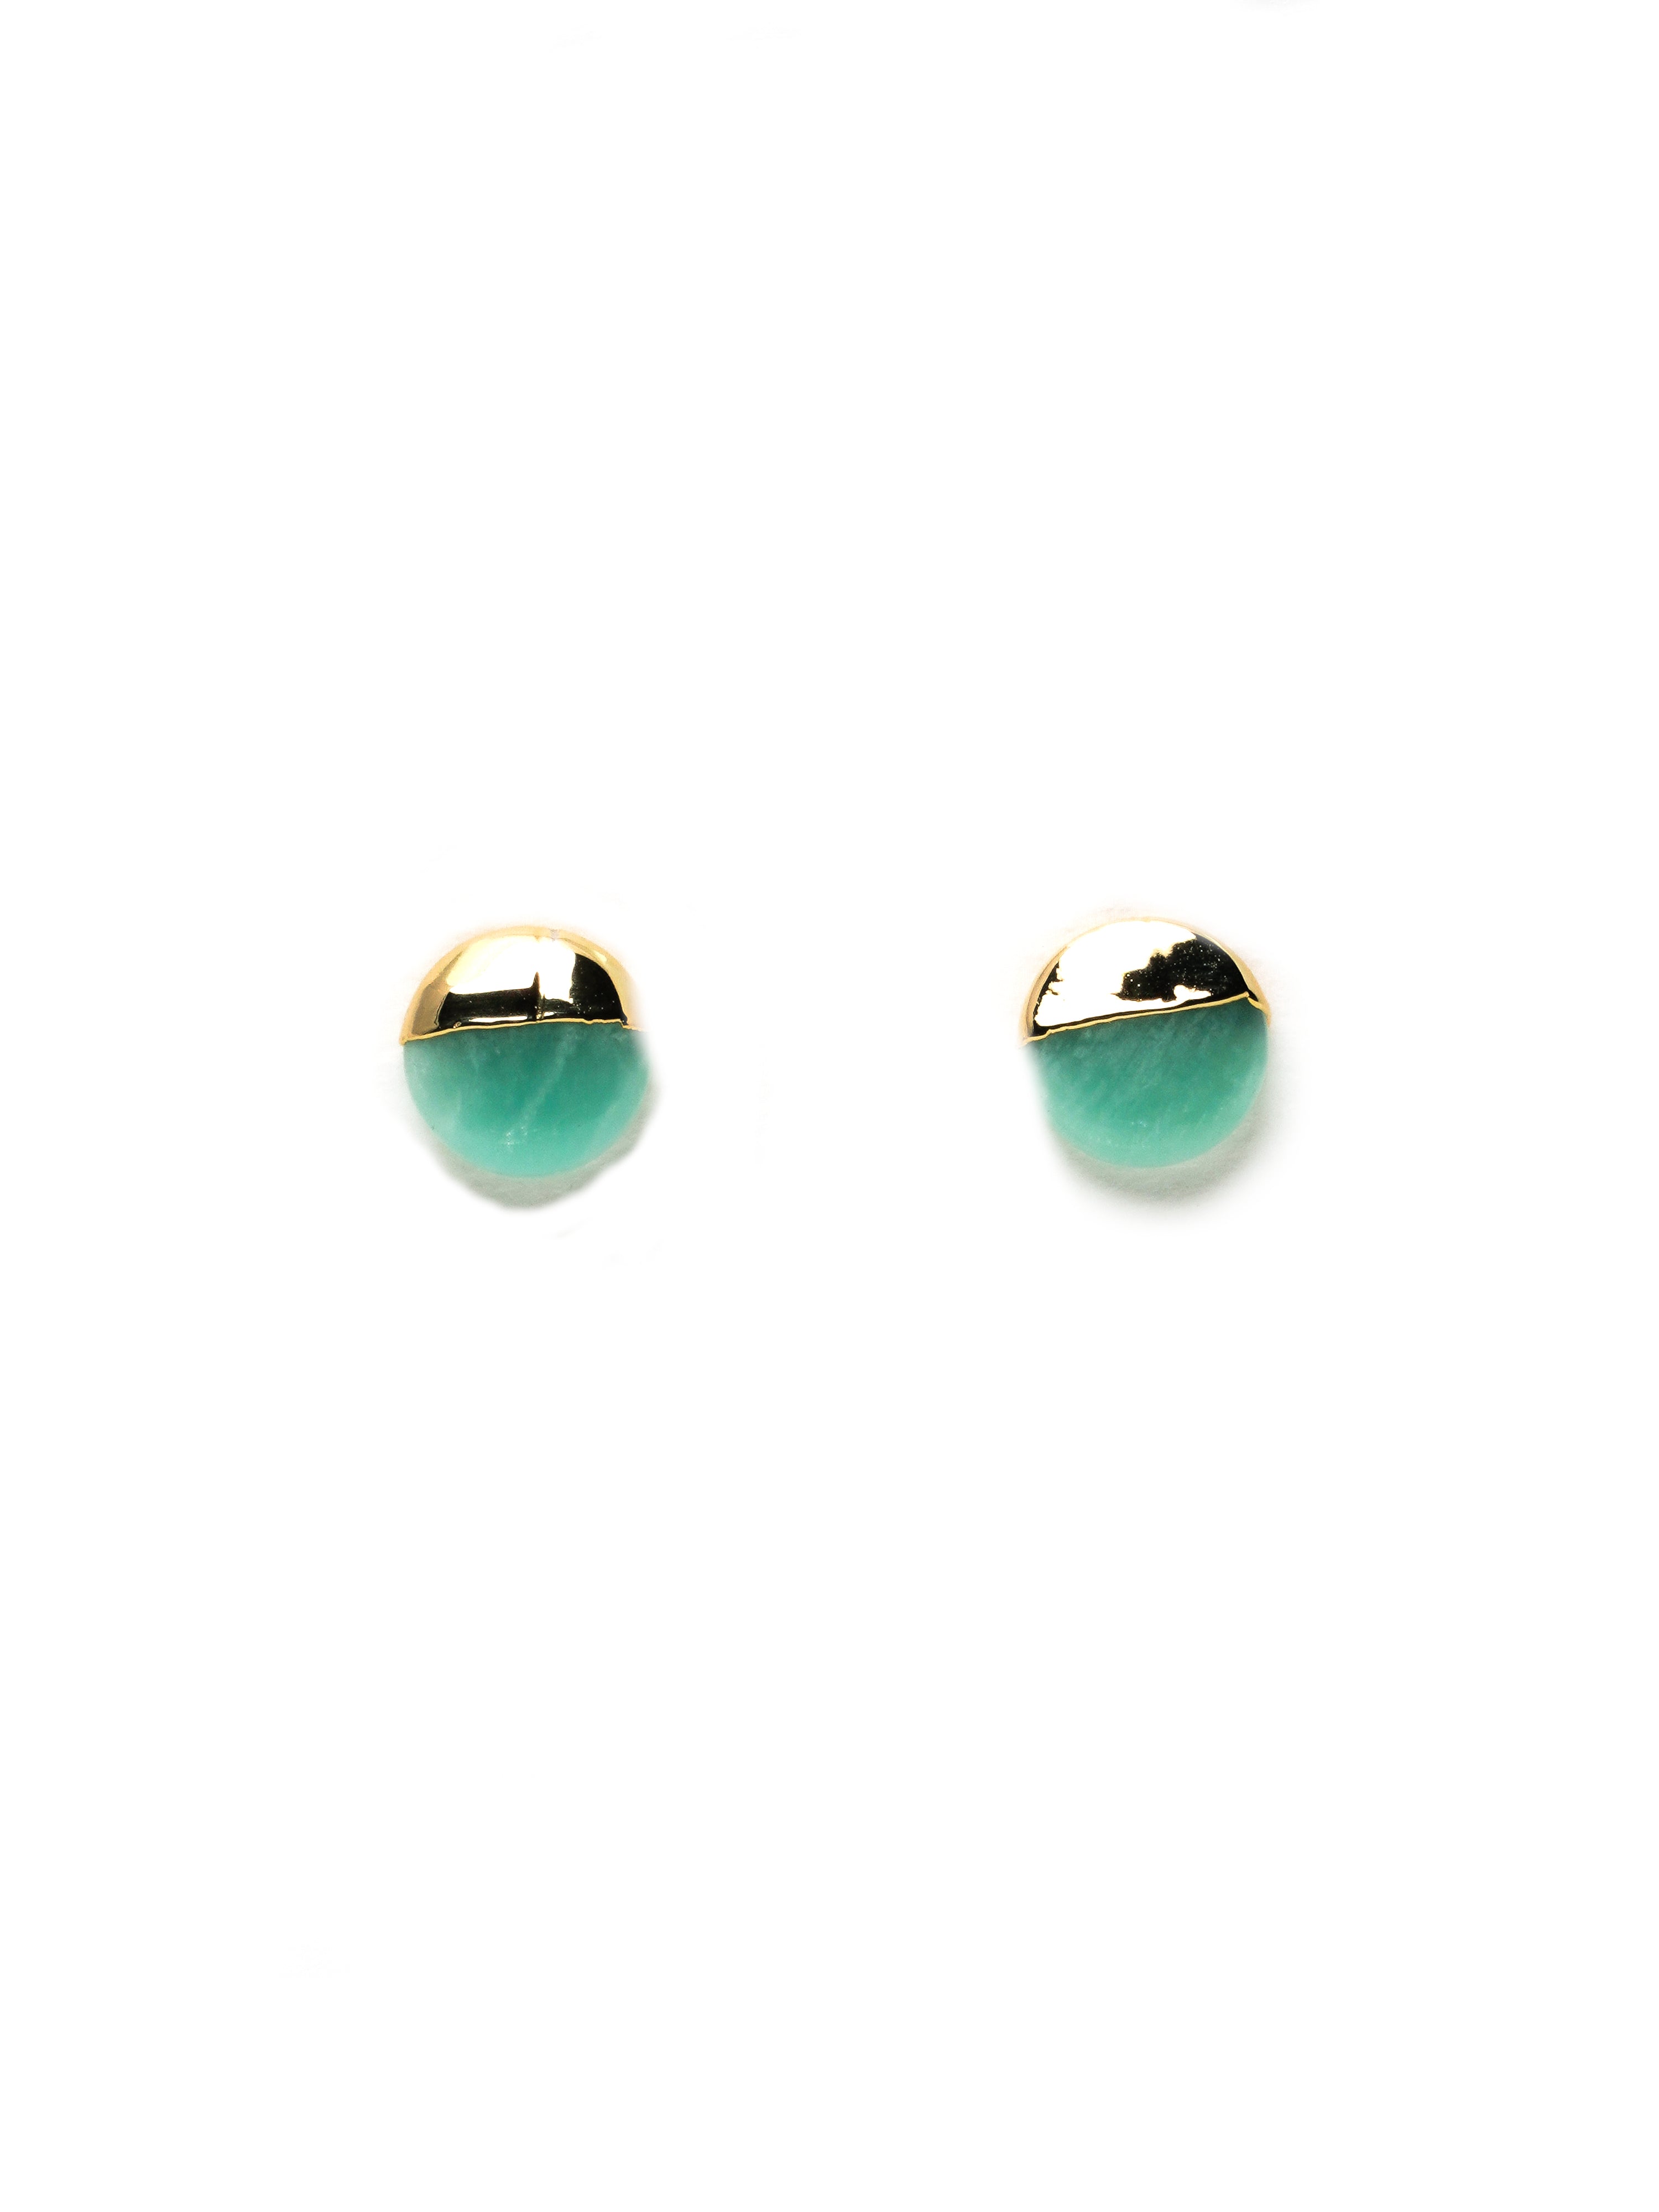 Gold Plated Rough Aventurine Small Stud Earrings   